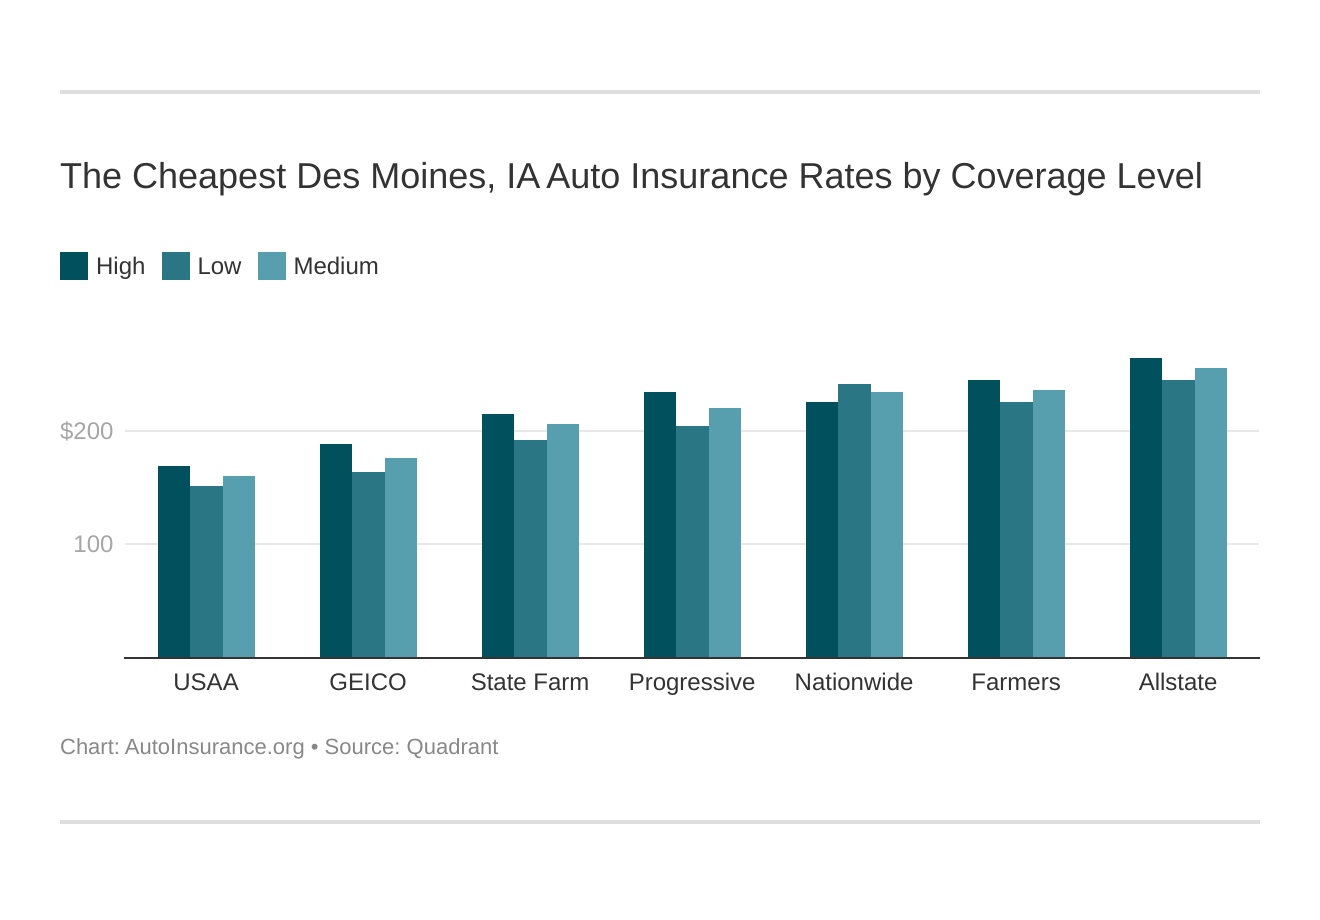 The Cheapest Des Moines, IA Auto Insurance Rates by Coverage Level